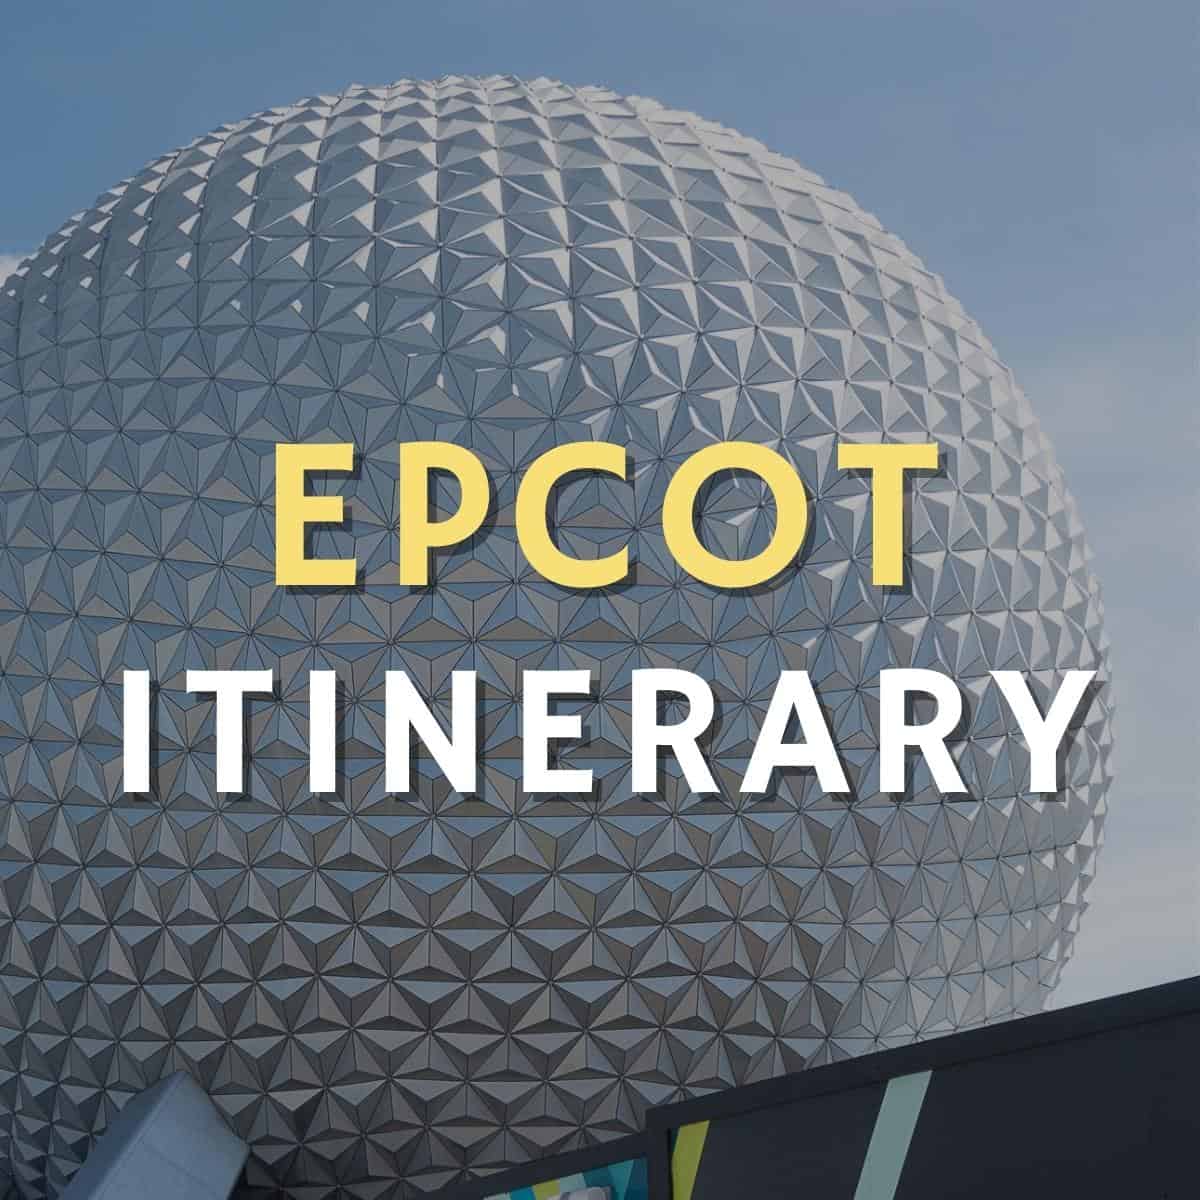 Day in EPCOT Itinerary plan